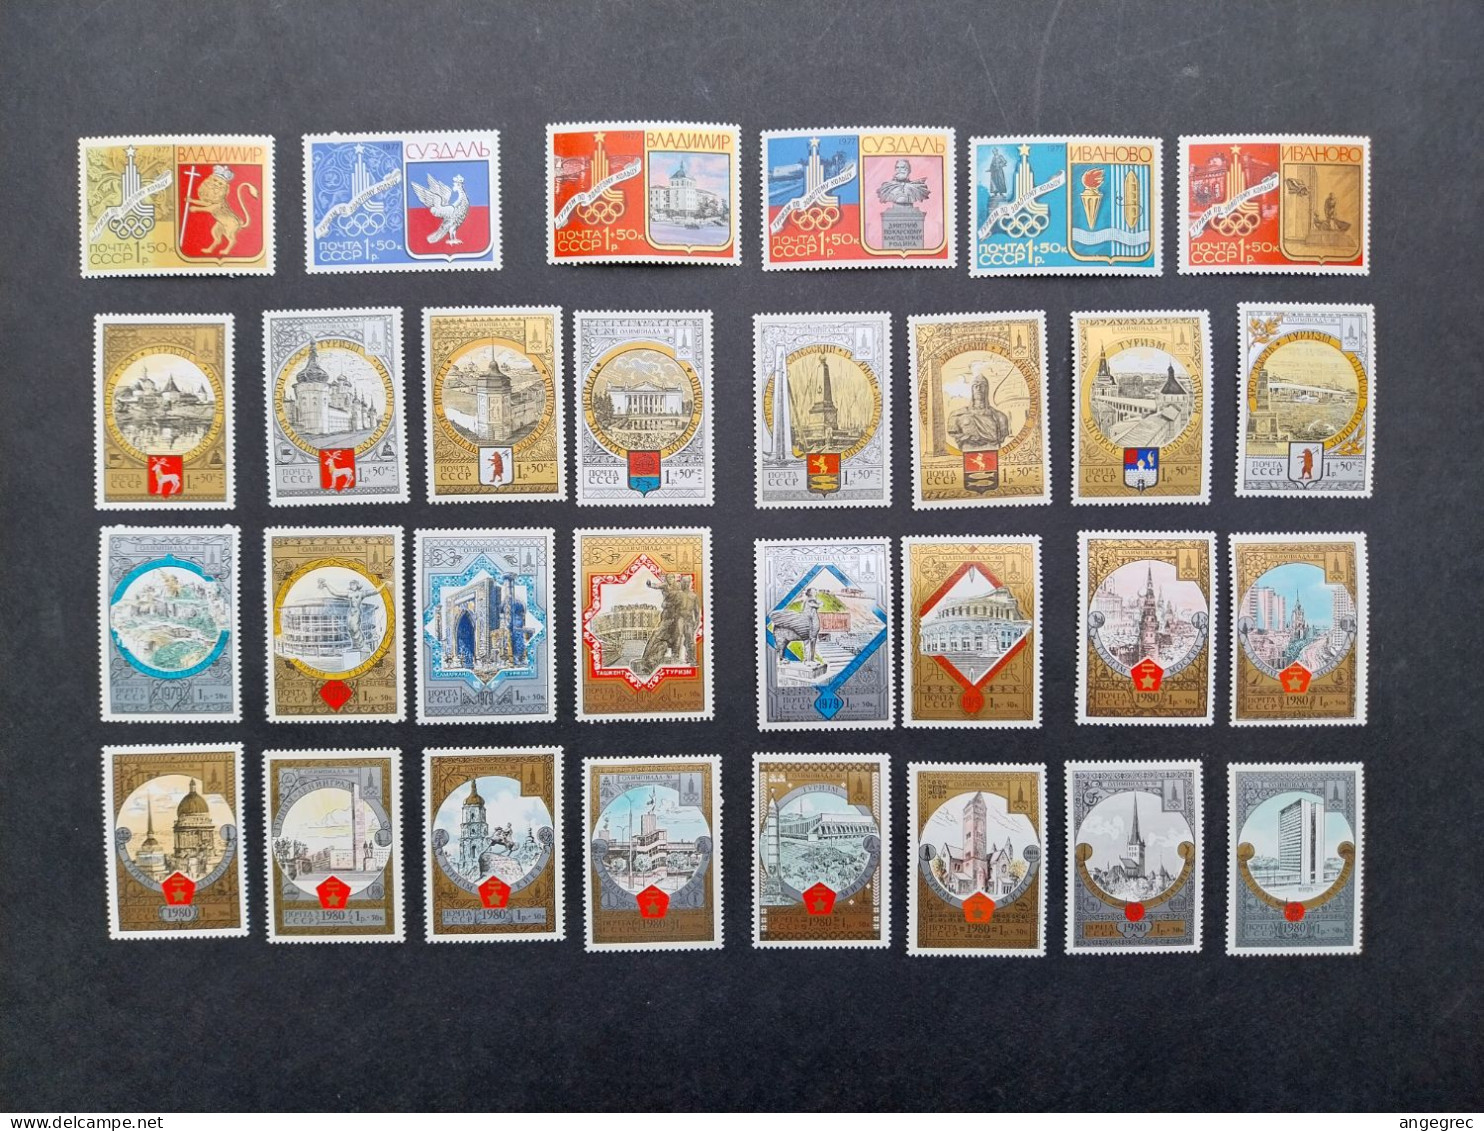 Russie Timbre Lot De 30 Ceinture D'or - Golden Rings Complet Set 30 Stamps Olympiade 80 Jeux Olympiques Neuf ** - Unused Stamps